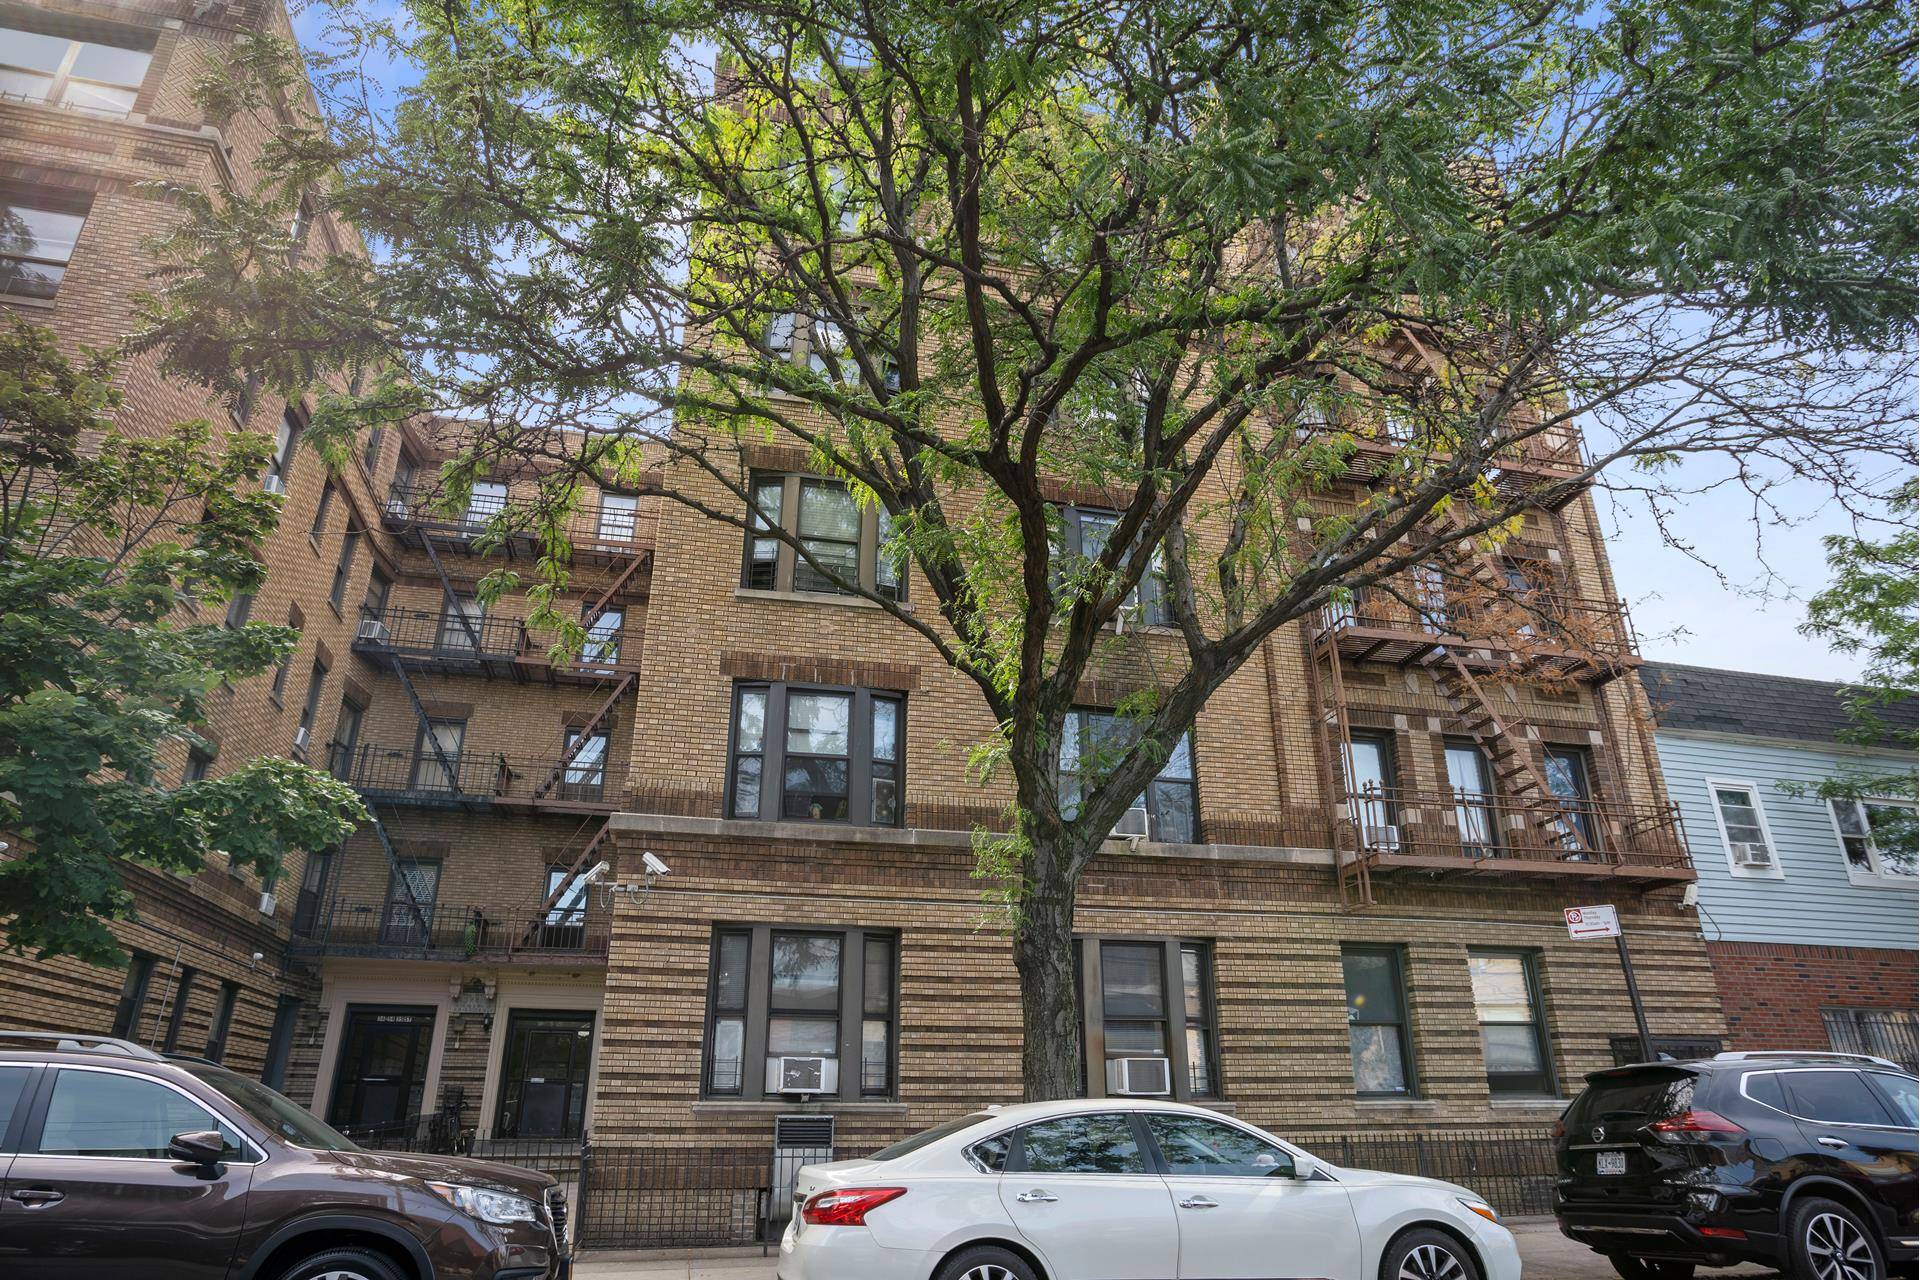 Douglas Elliman Real Estate has been retained on an exclusive basis for the sale of 36 52 35th Street located in Astoria right off of Northern Blvd.